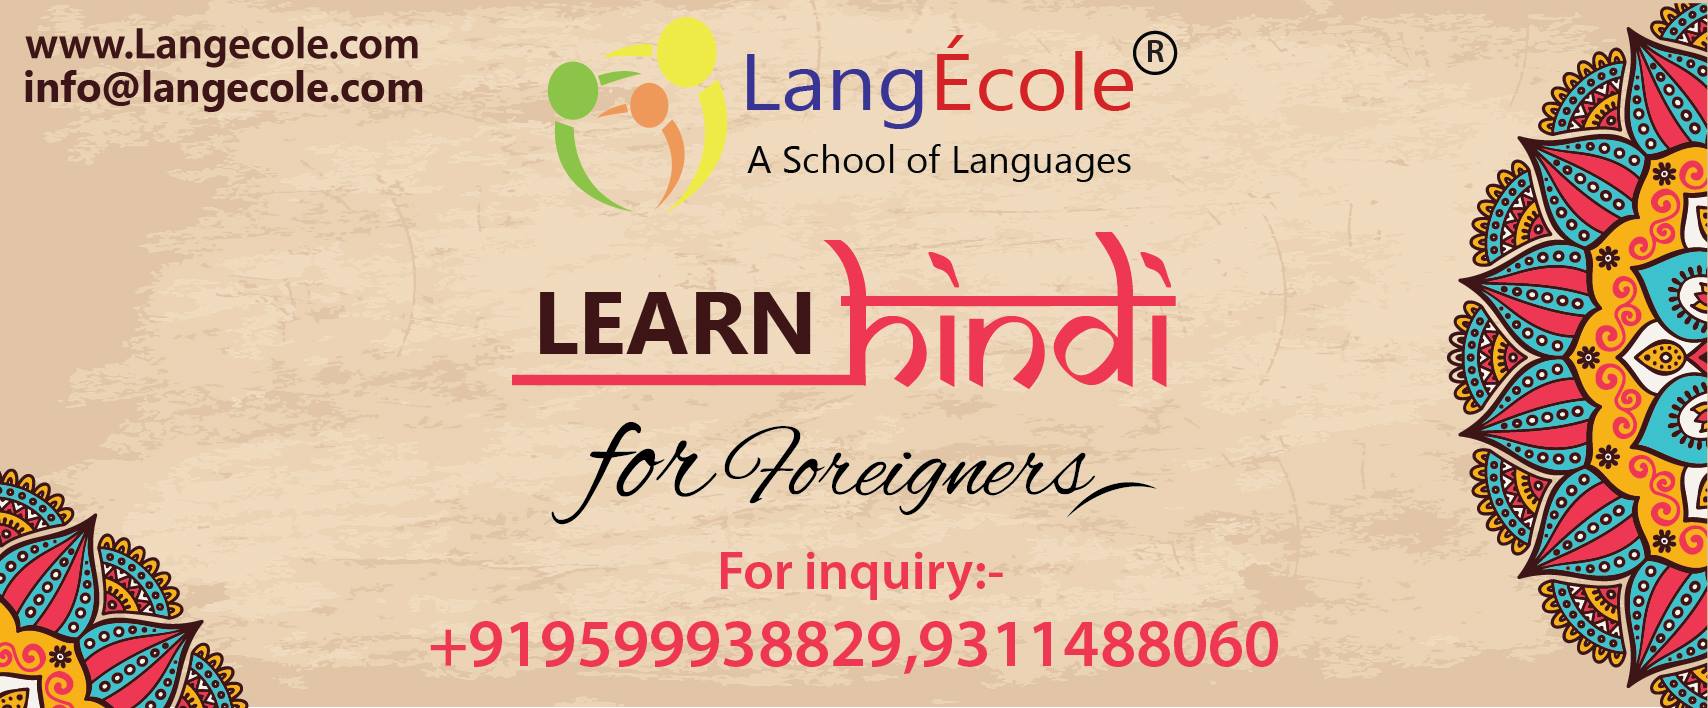 Learn Hindi Basic Level at LangÉcole®, New Delhi